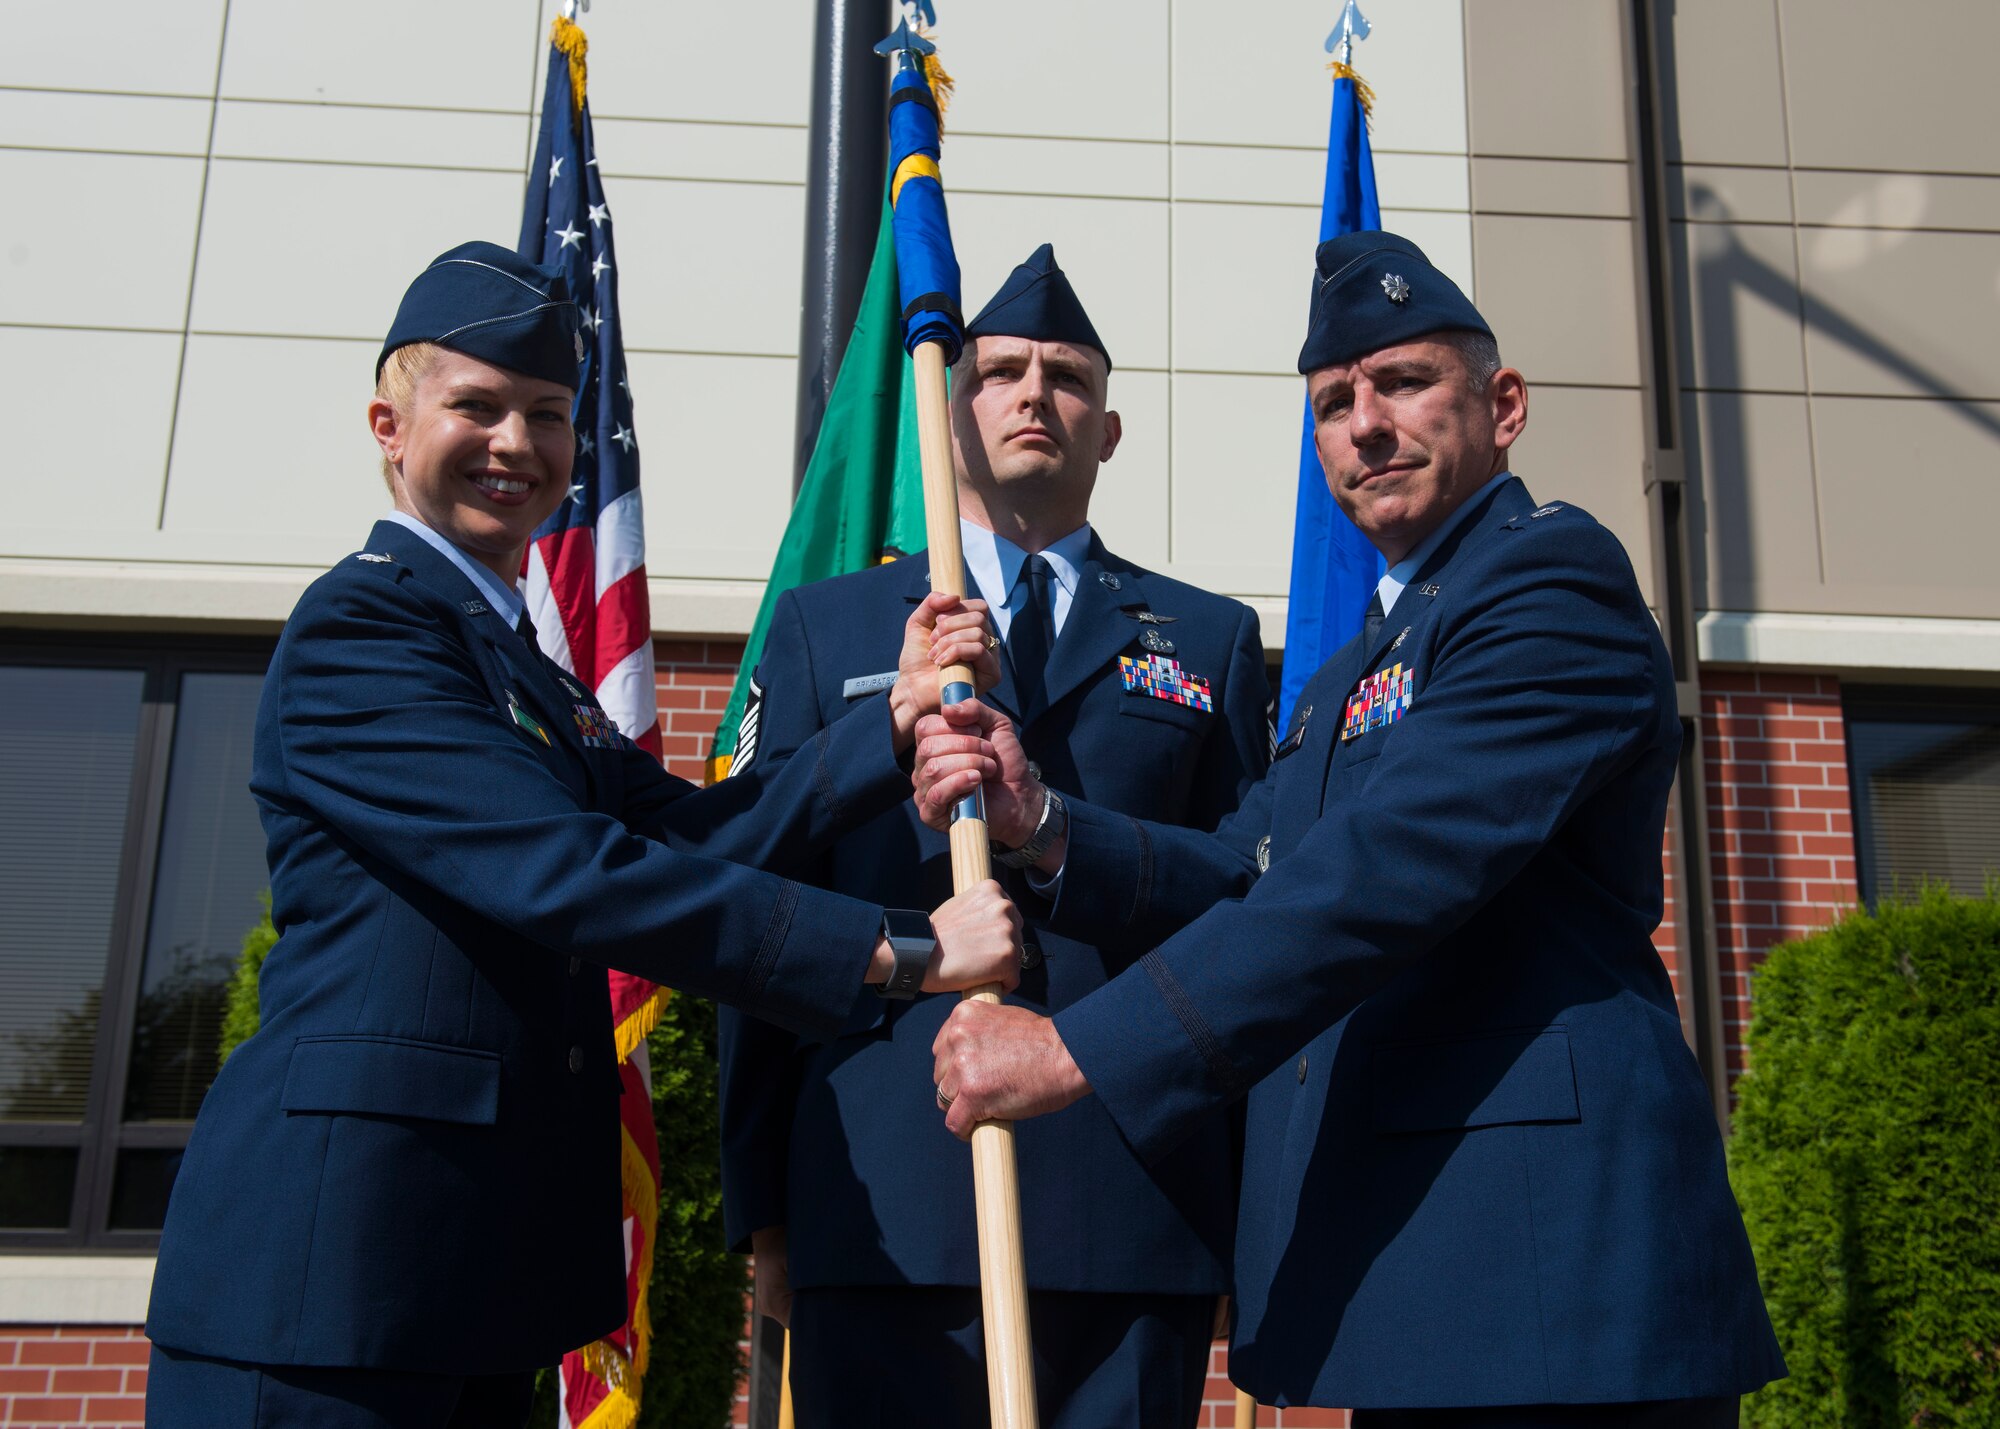 U.S. Air Force Lt. Col. Heather Nelson, 92nd Medical Group commander, passes the new 92nd Health Care Operations Squadron guidon to Lt. Col. Michael McCarthy, 92nd HCOS commander, during a re-designation ceremony at Fairchild Air Force Base, Washington, July 19, 2019. The purpose of the medical re-designation is to better focus resources to promote readiness and ensure the retirees and beneficiaries receive their health care benefits. (U.S. Air Force photo by Airman 1st Class Lawrence Sena)